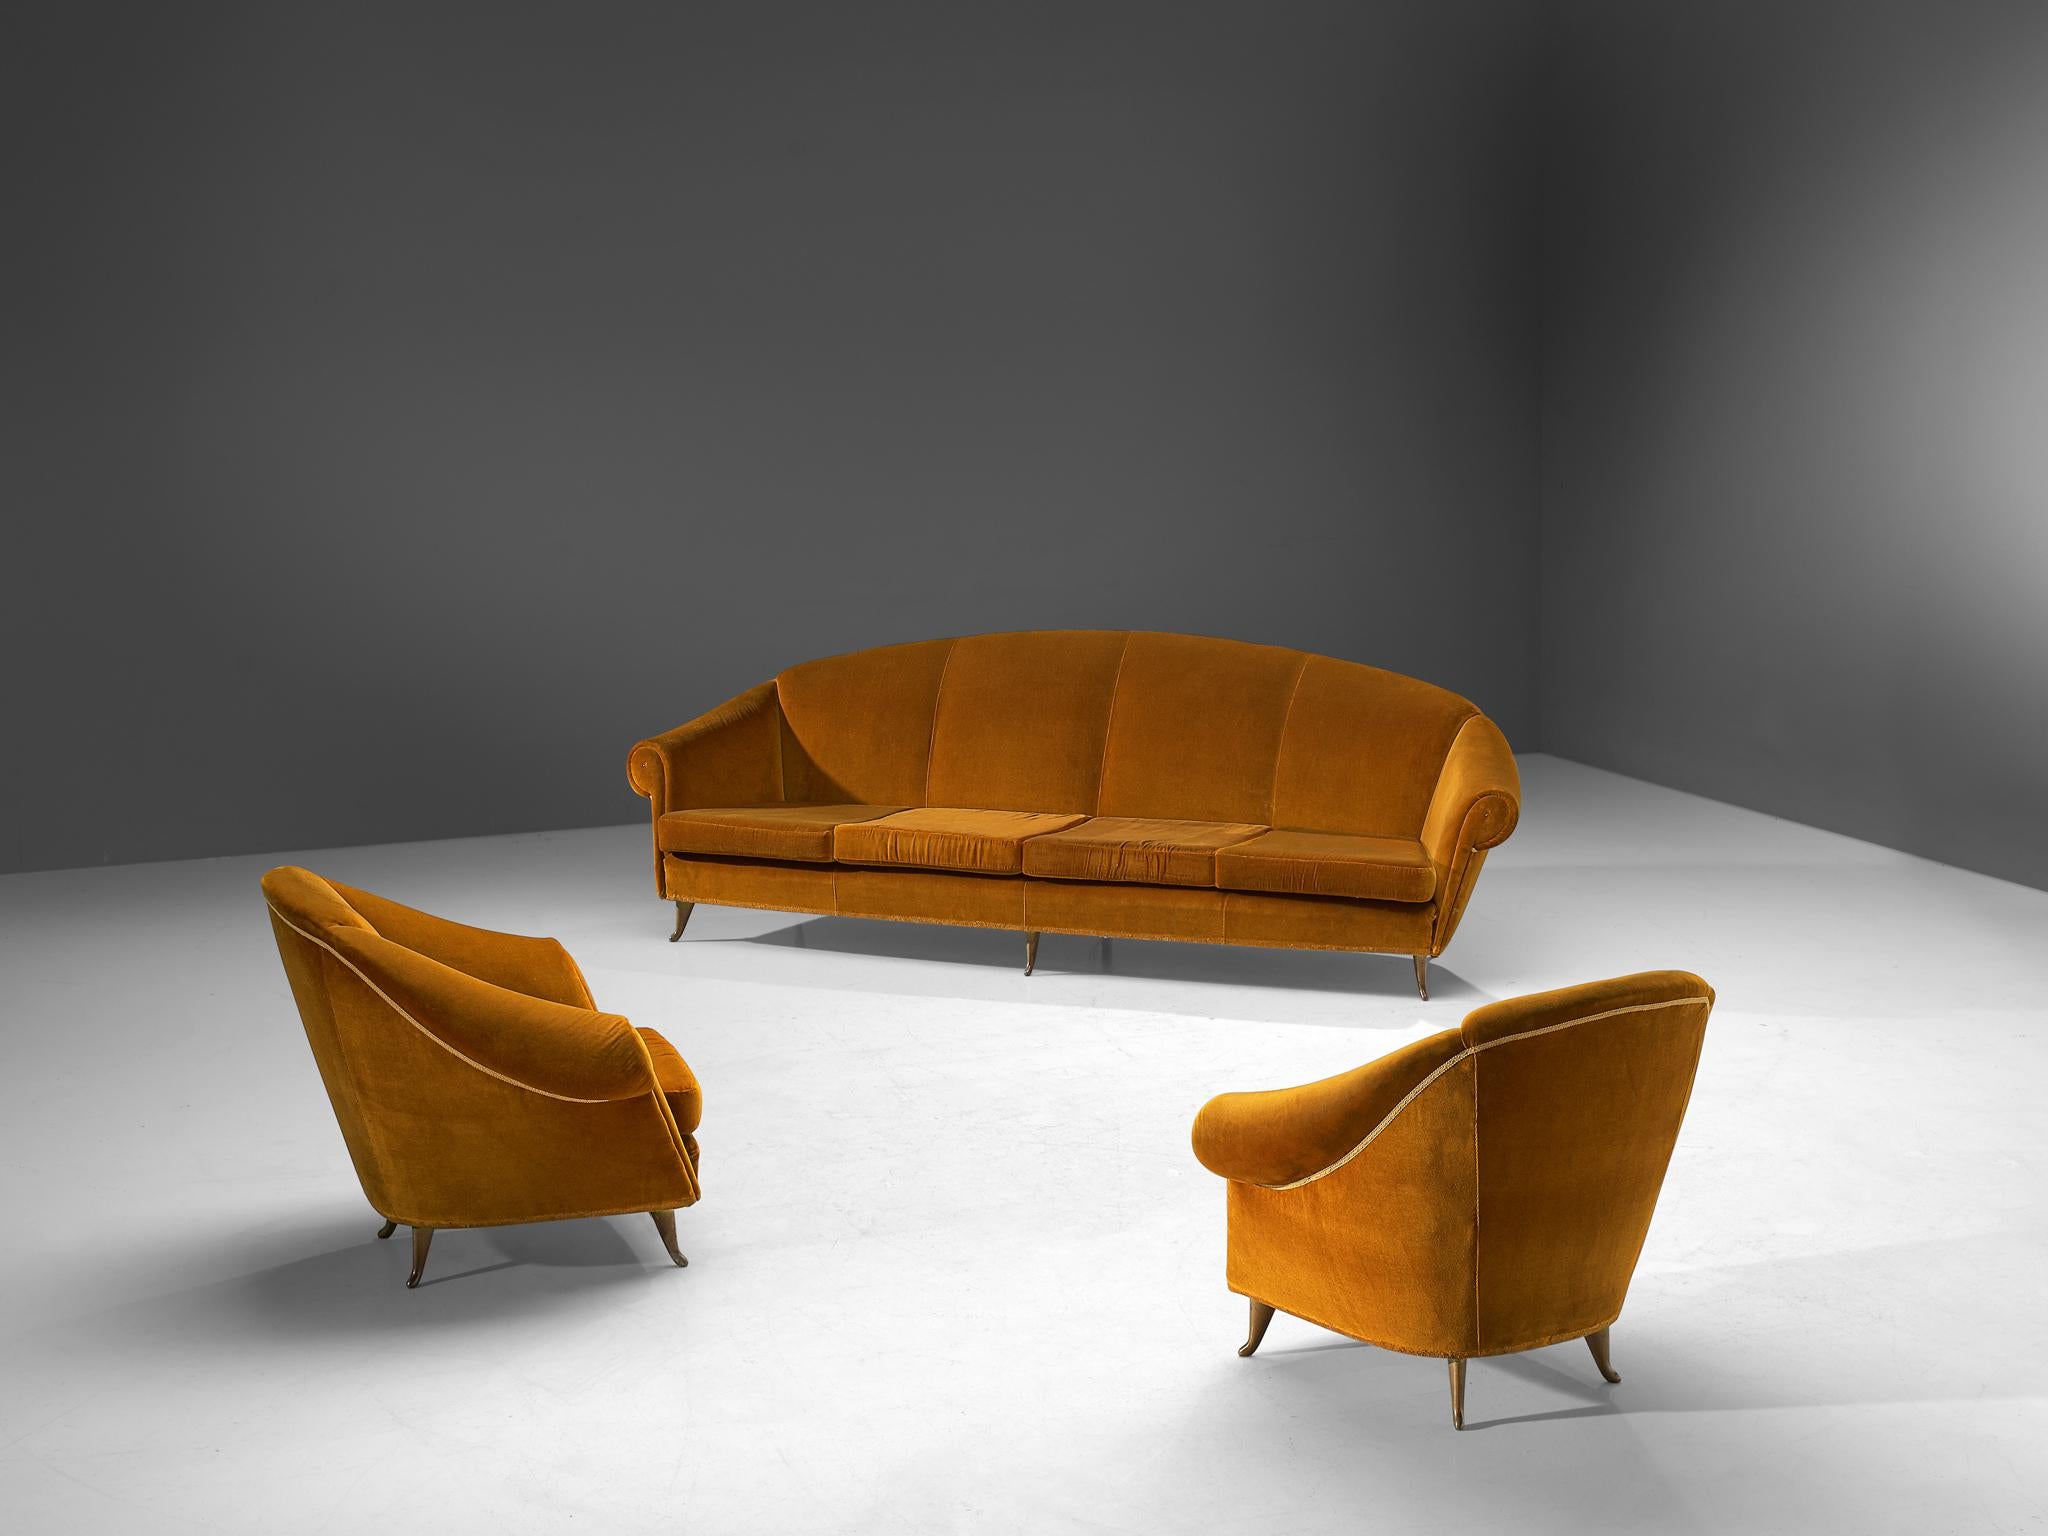 Living room set, velvet and brass, Italy, 1940s

This voluptuous, elegant set, consisting of a four-seat sofa and two lounge chairs, features high, to ascended backs that flow over to the thick, curled armrests. These features give these chairs